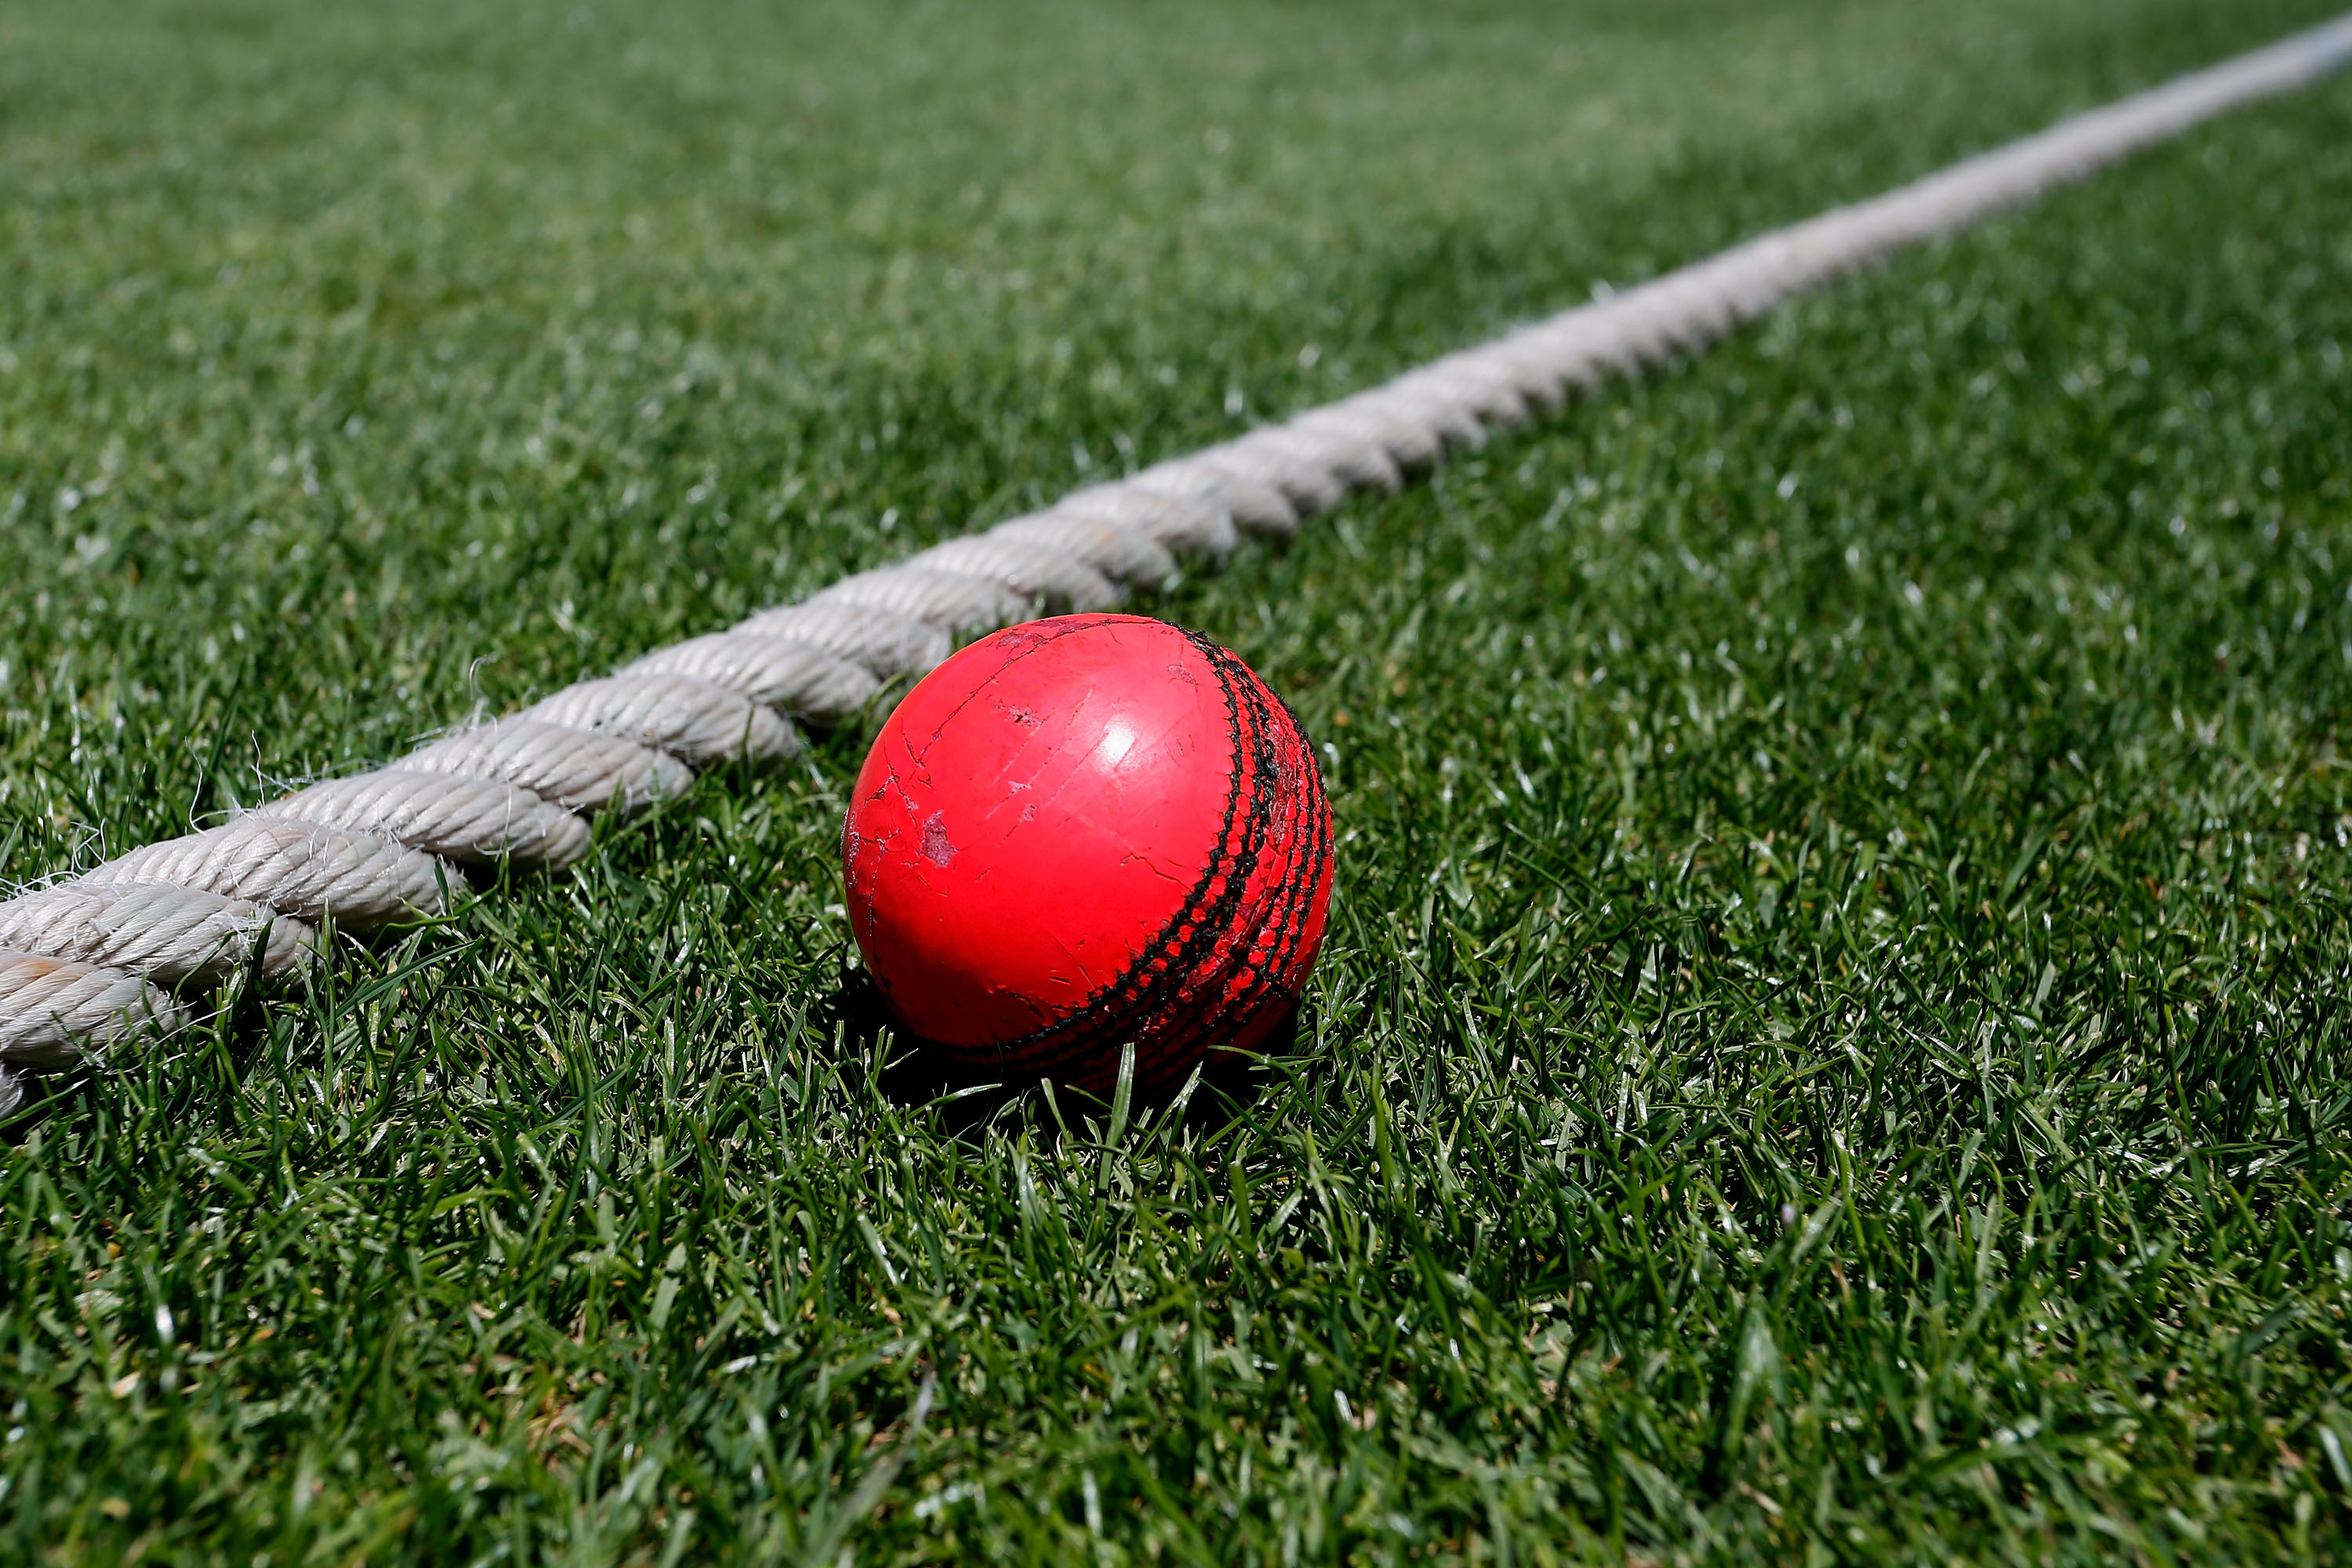 BCCI orders 72 pink balls from SG for Eden Test